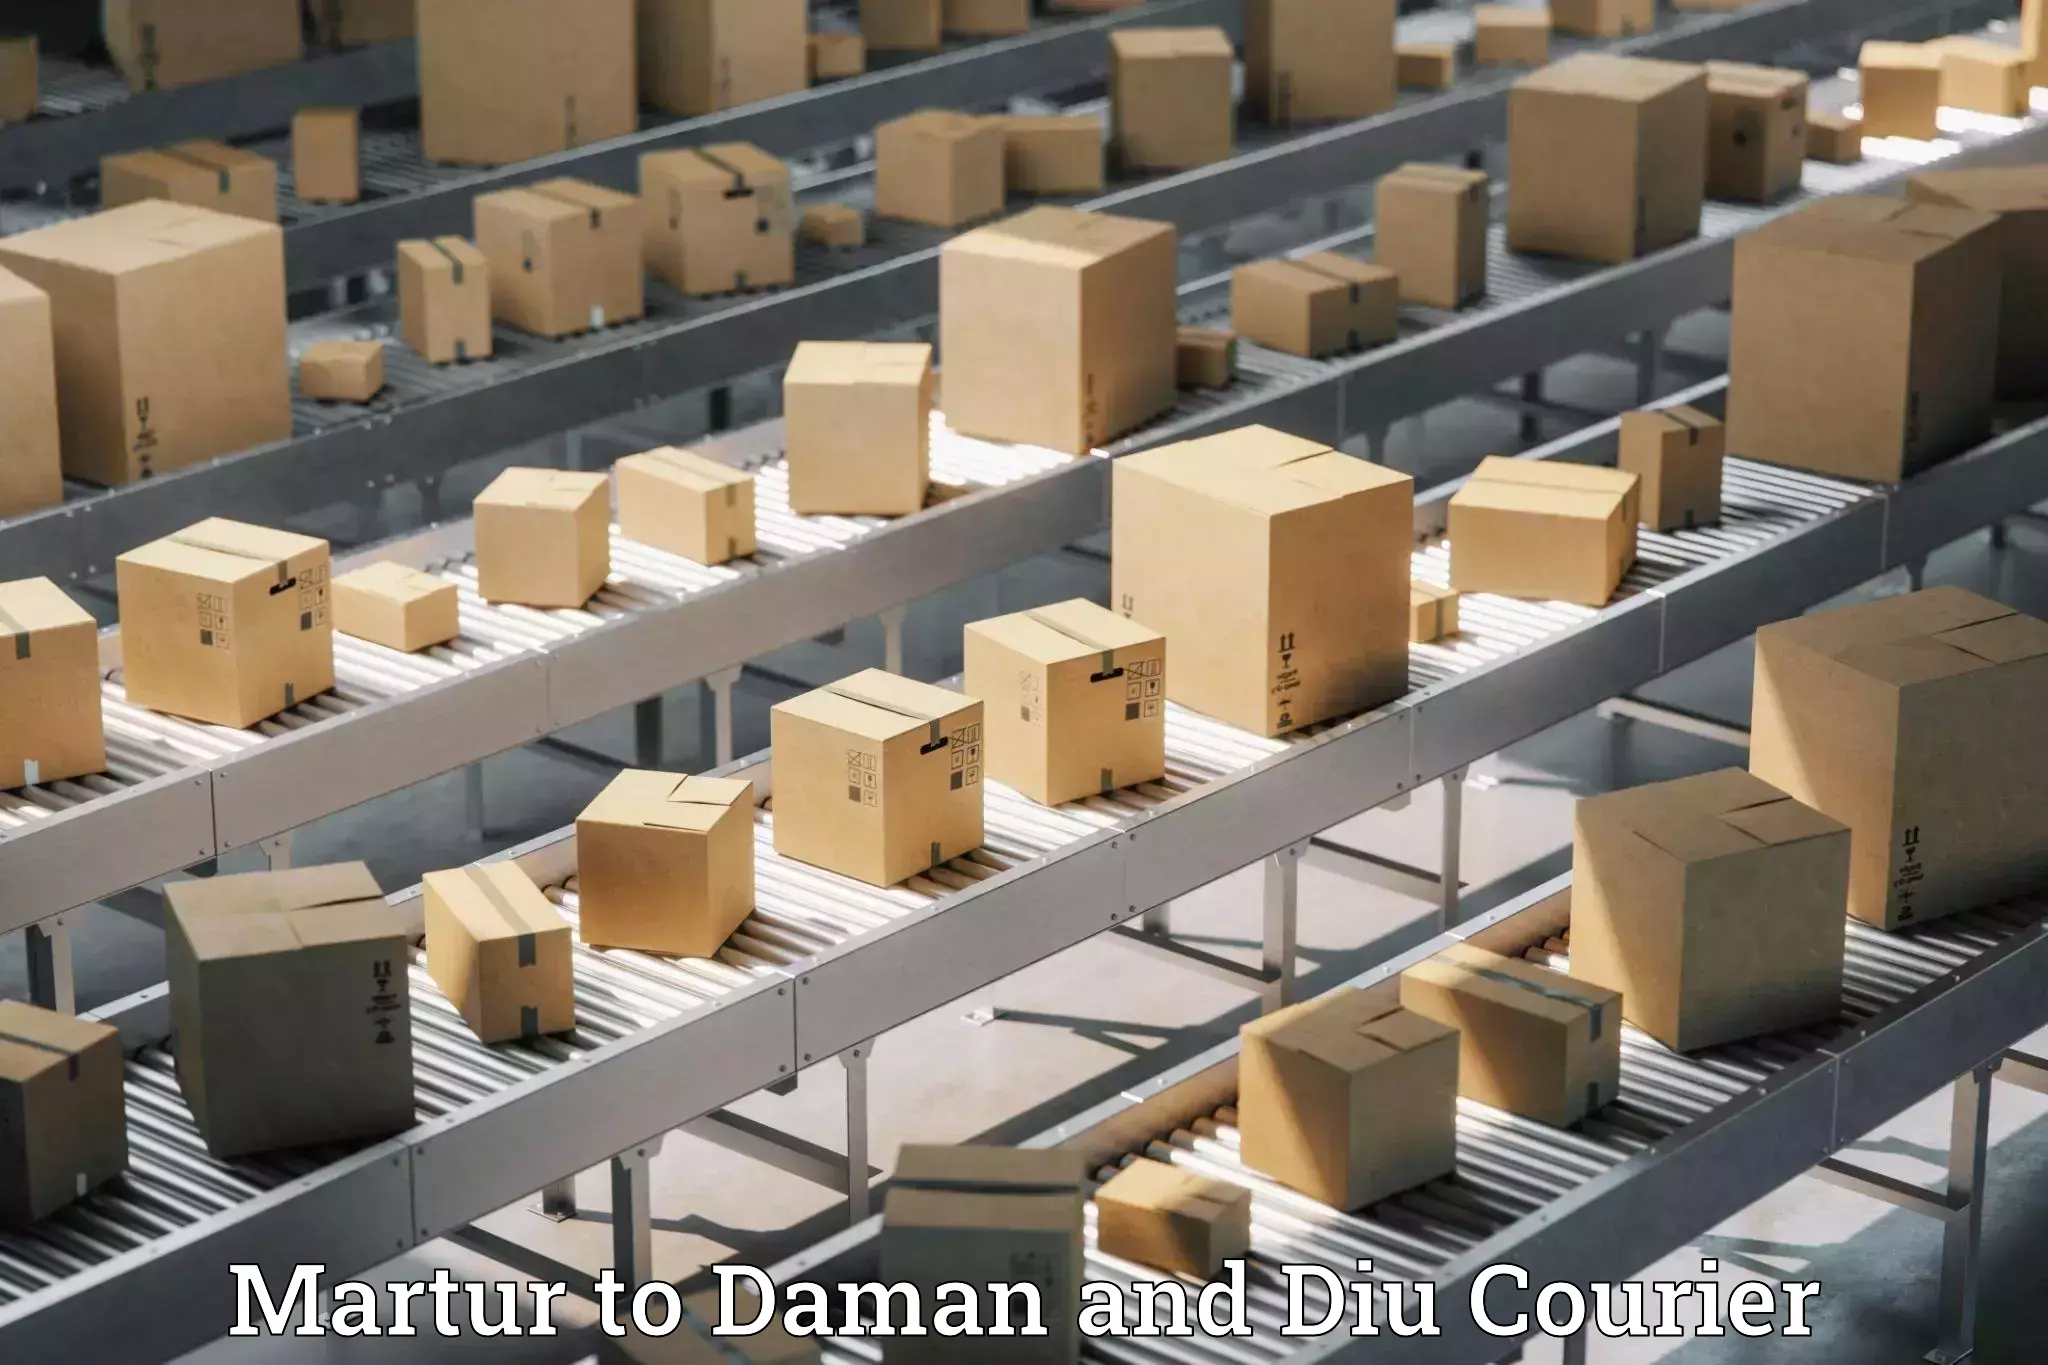 Shipping and handling Martur to Daman and Diu